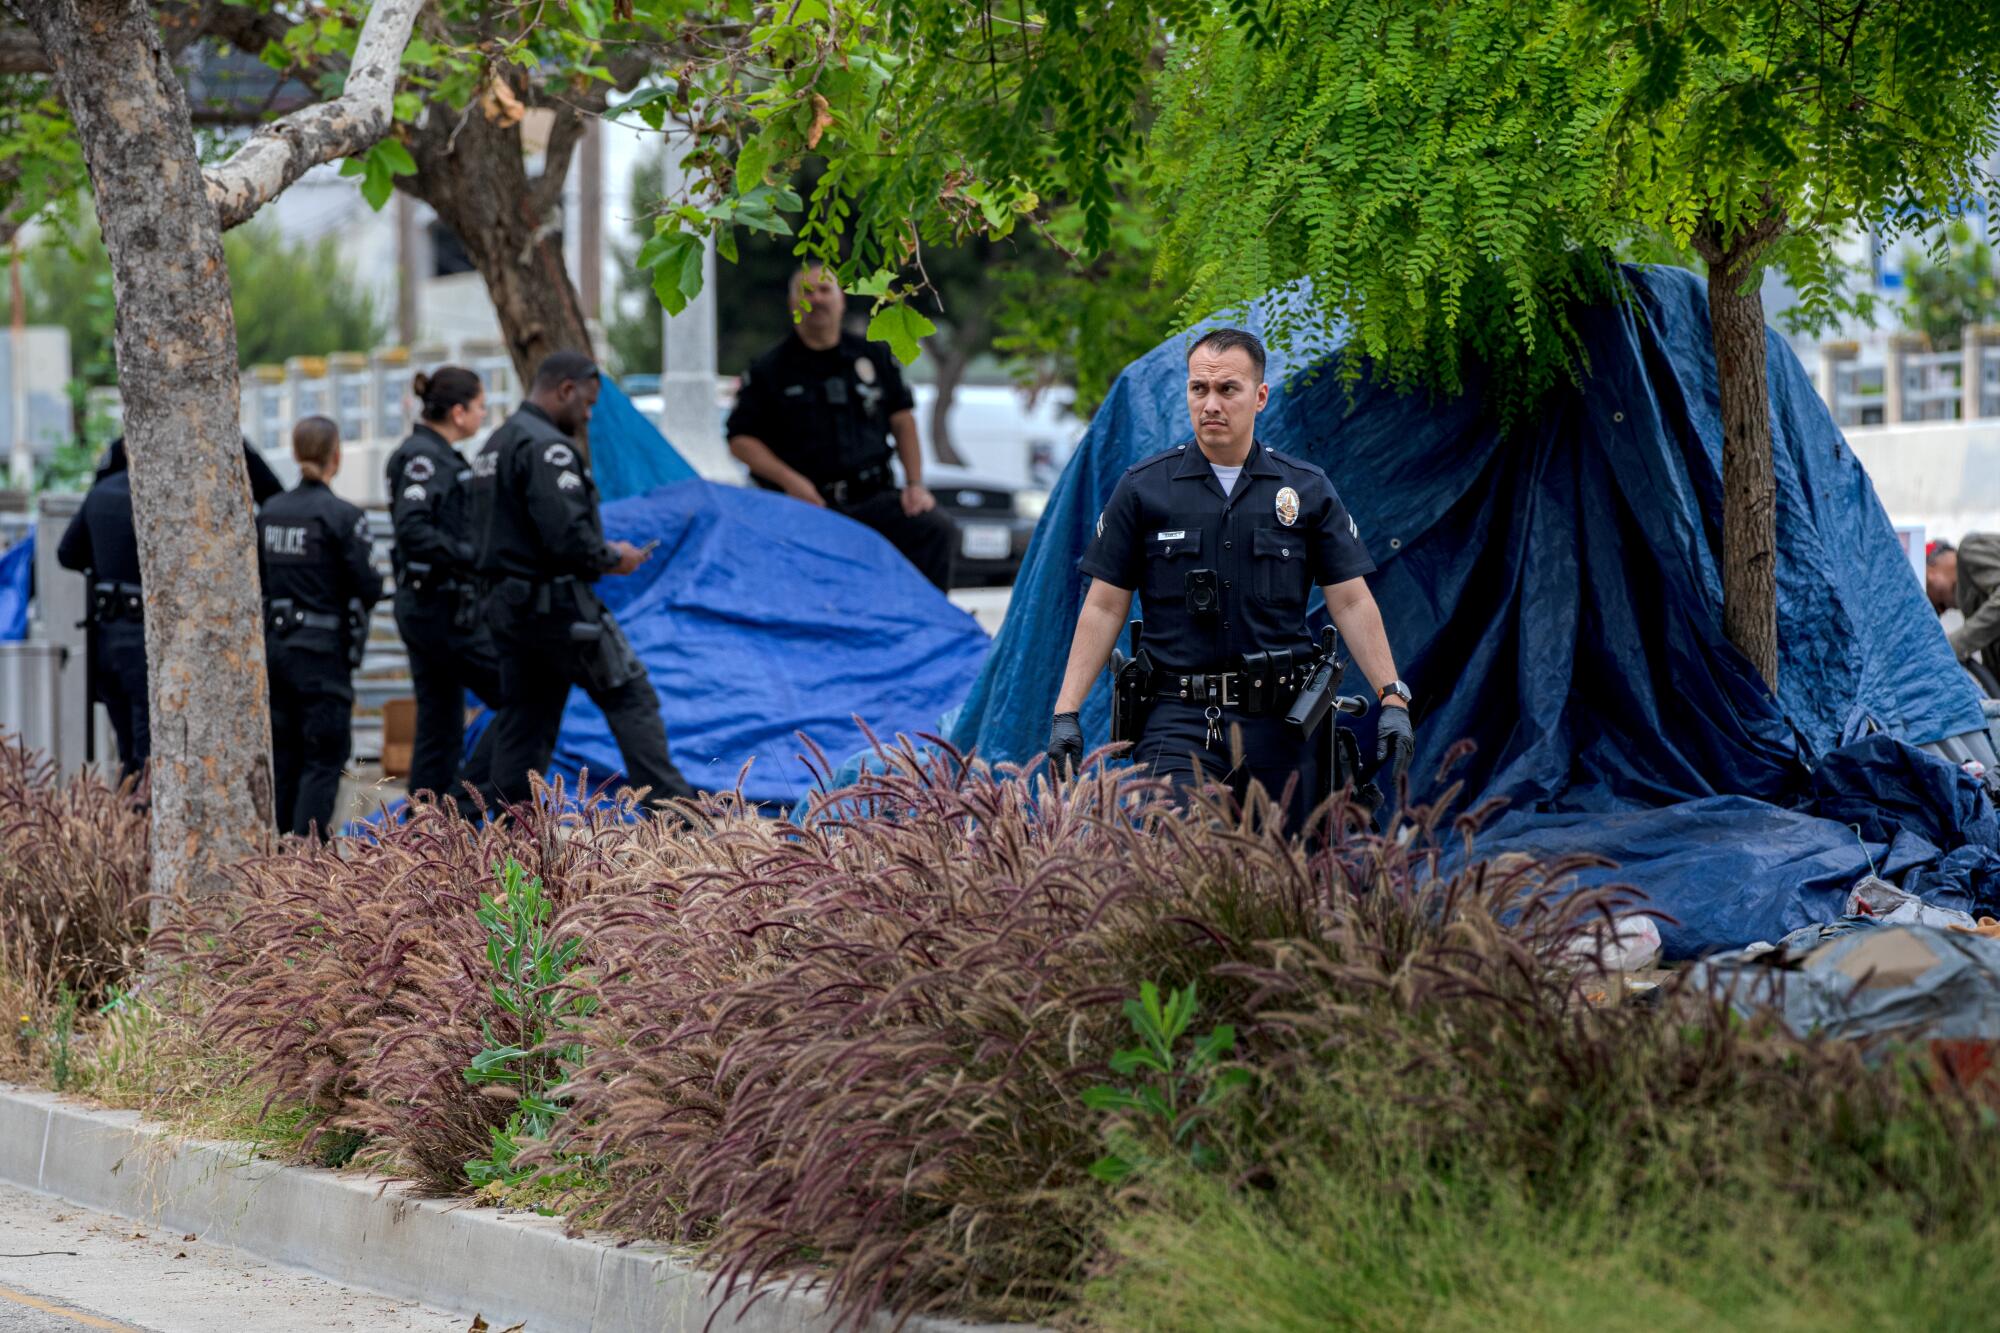 Police officers walk among tents in a homeless encampment.